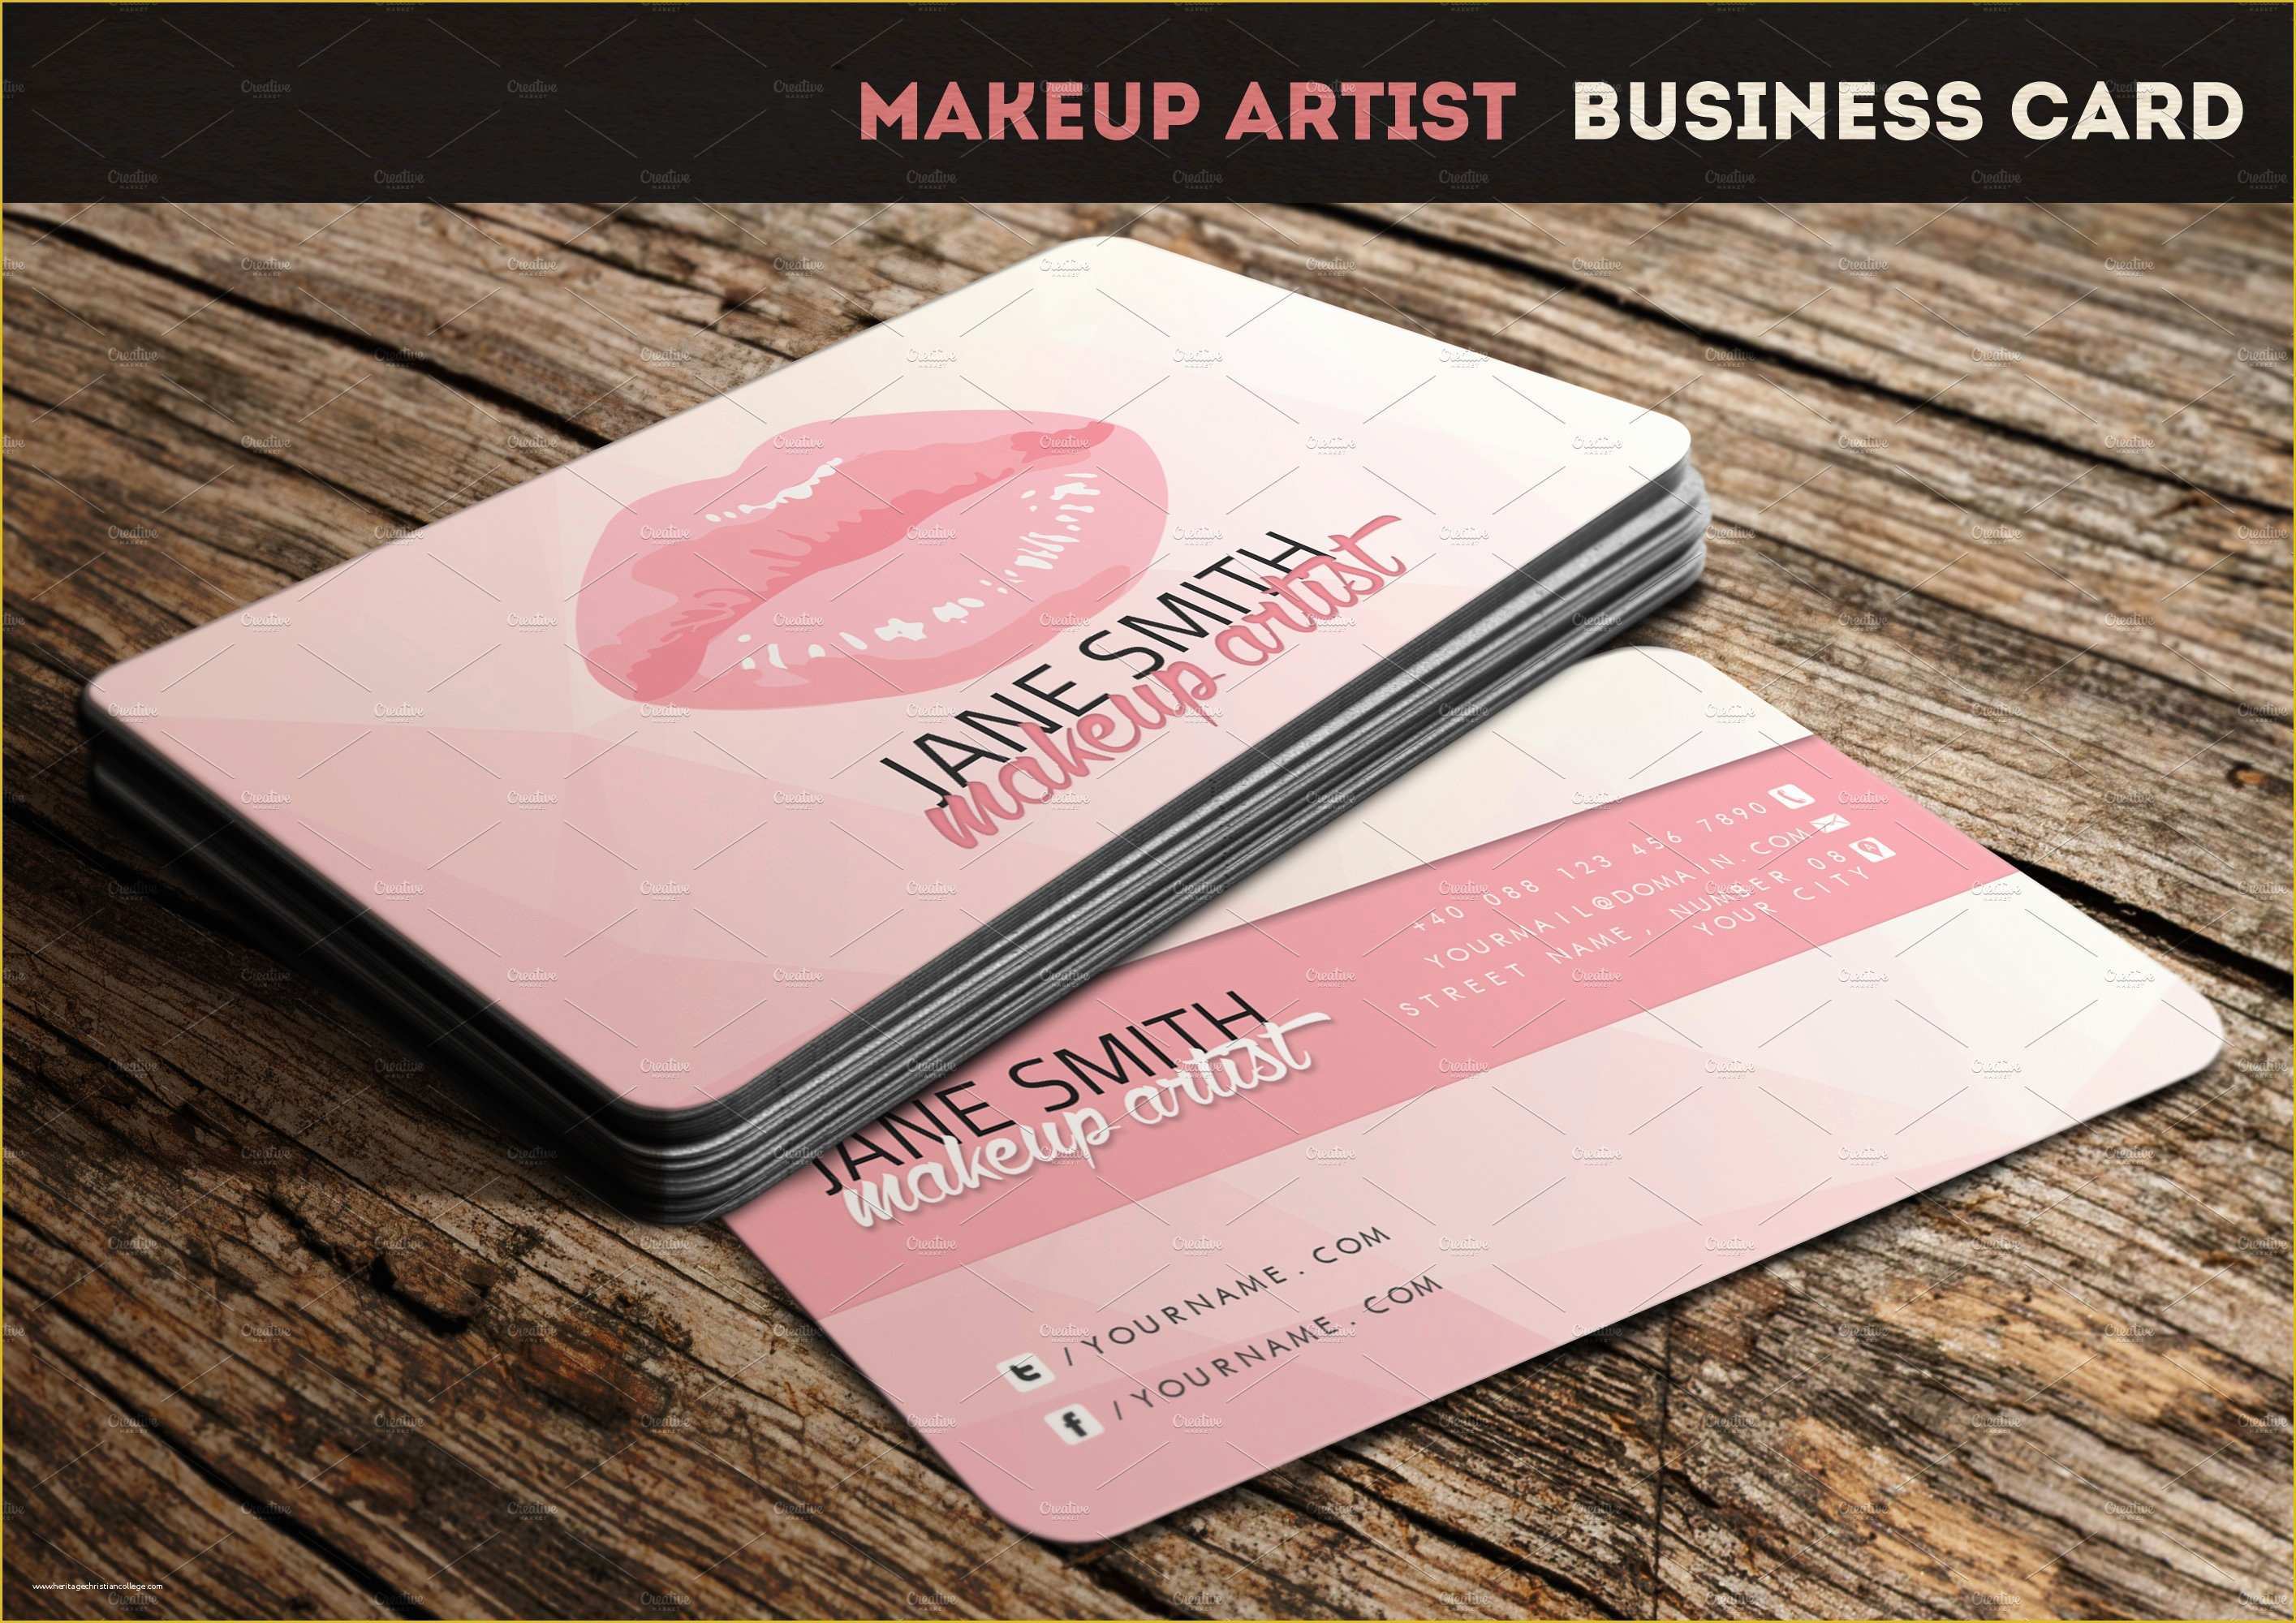 Artist Business Cards Templates Free Of Makeup Artist Business Card Business Card Templates